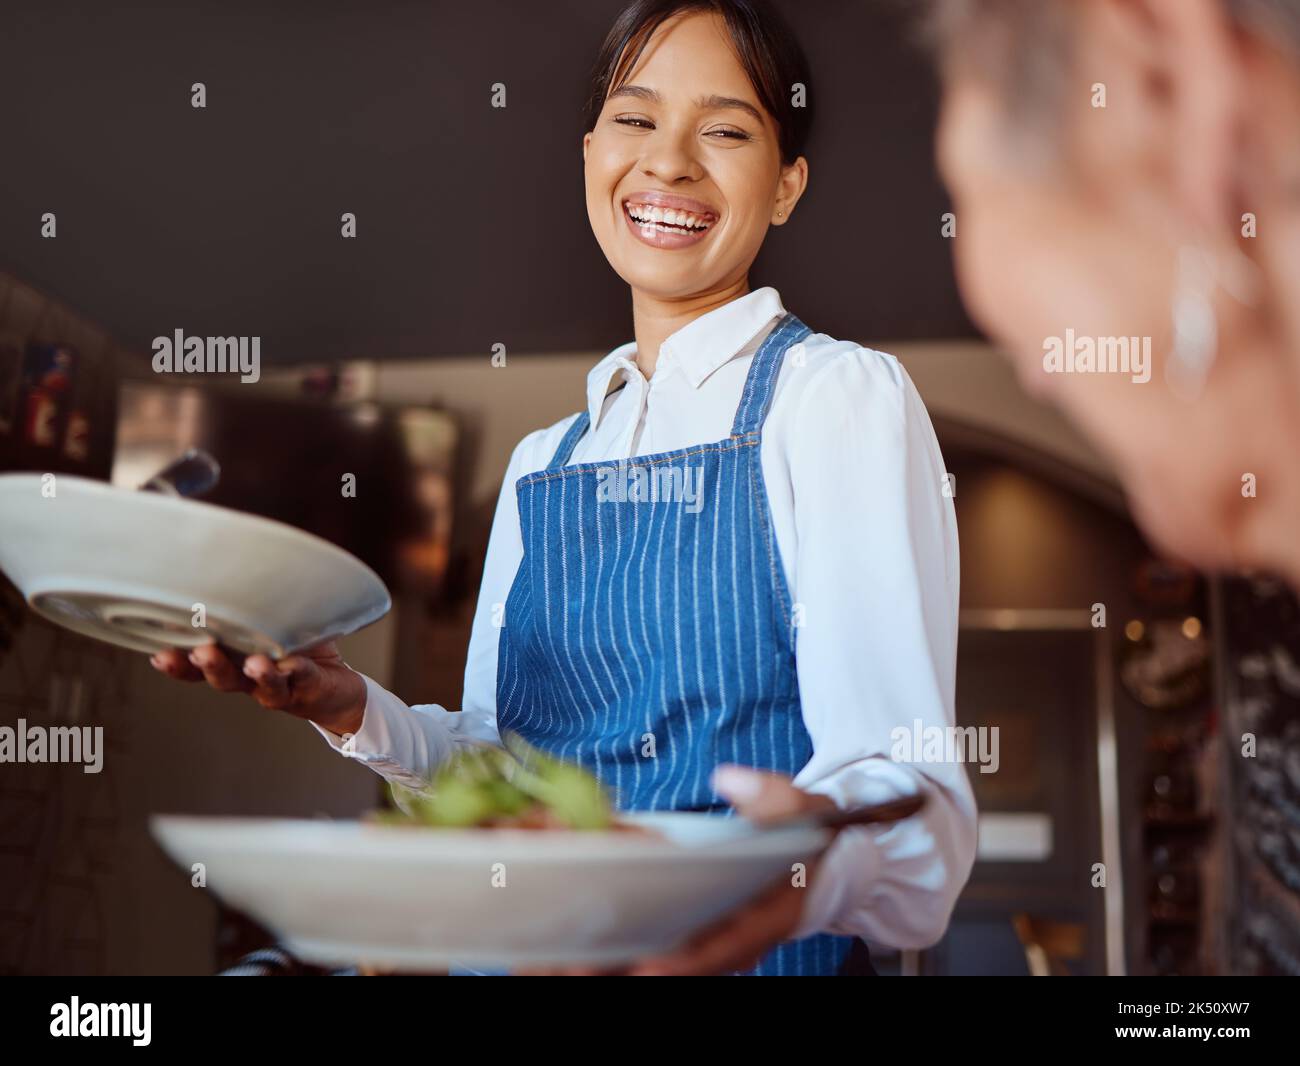 Waitress in a restaurant, serving customer her food, healthy salad and gives service with a smile. Woman in the hospitality industry, friendly laugh Stock Photo